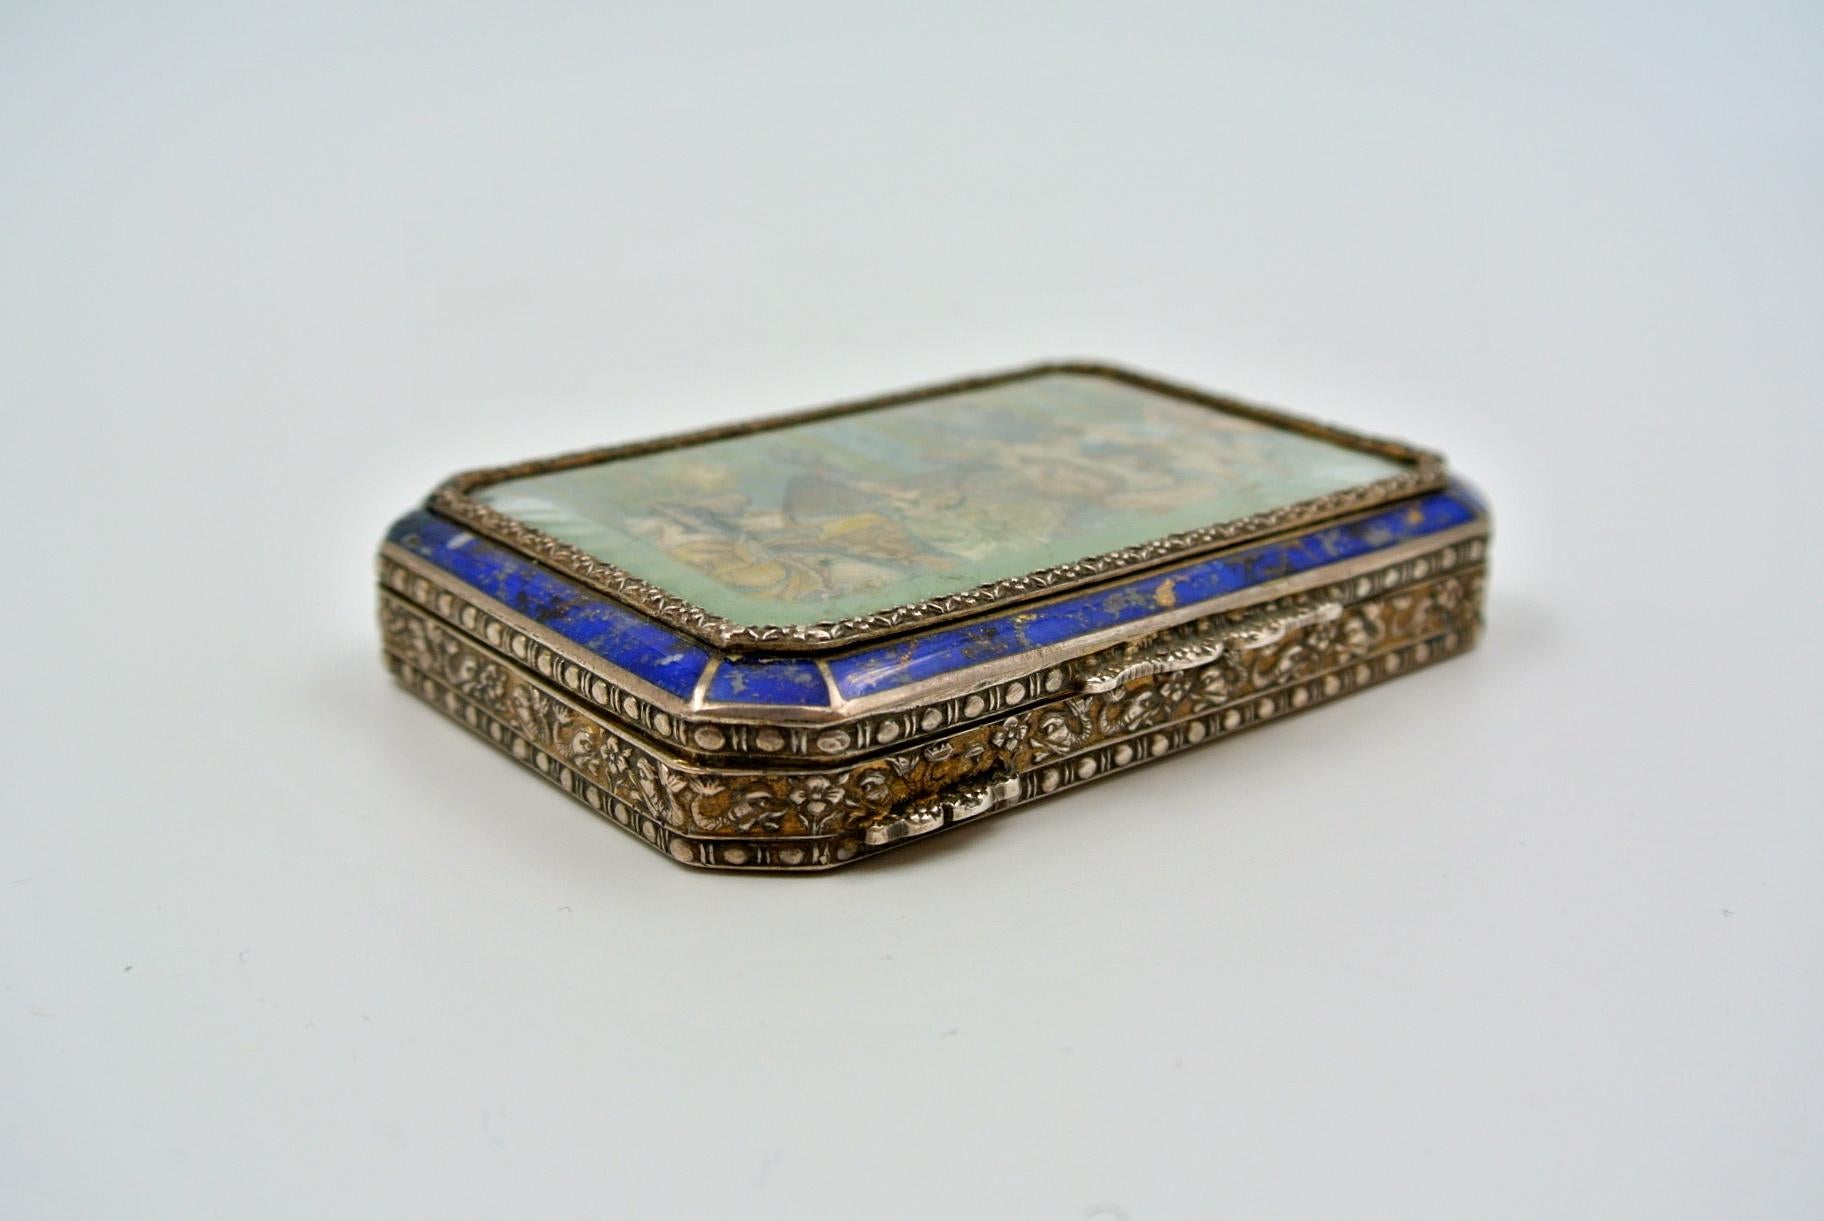 Small silver box, precious with an engraved and painted scene, surrounded by Lapis Lazuli, 19th century, Napoleon III Period.
Measures: H 1.5cm, W 8cm, D 5.5cm.